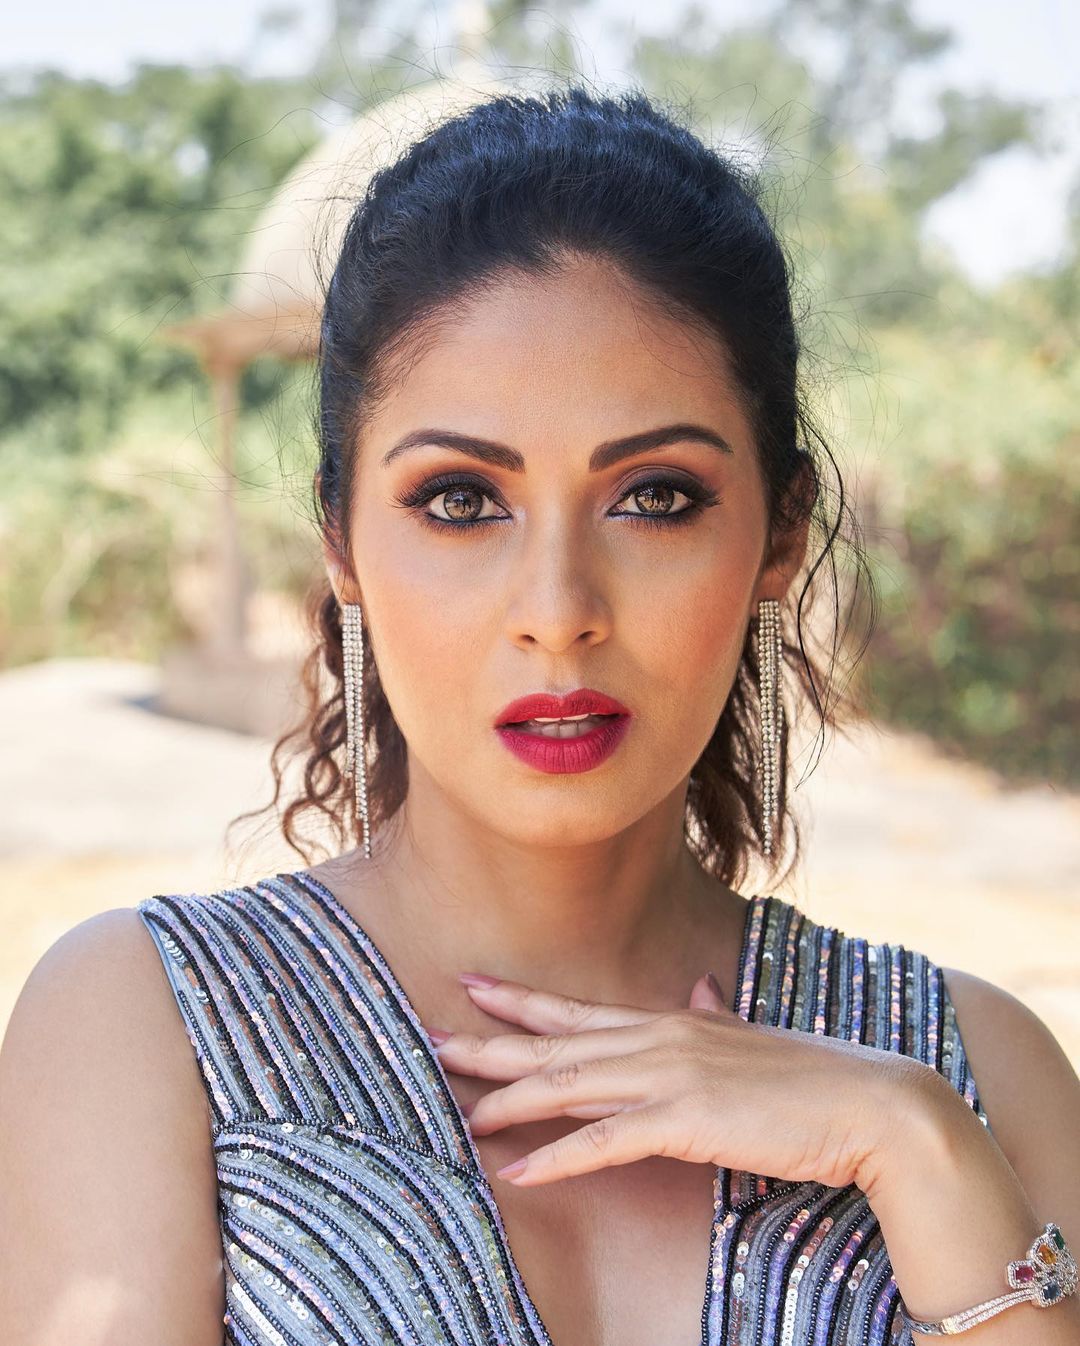 Actress sadaa looks sizziling hot and spicy in this photos-Sadaa Actress, Sadaa Pics, Sadaaawesome, Sadaa Latest, Tollywod Sadaa, Sadha Spicy Photos,Spicy Hot Pics,Images,High Resolution WallPapers Download